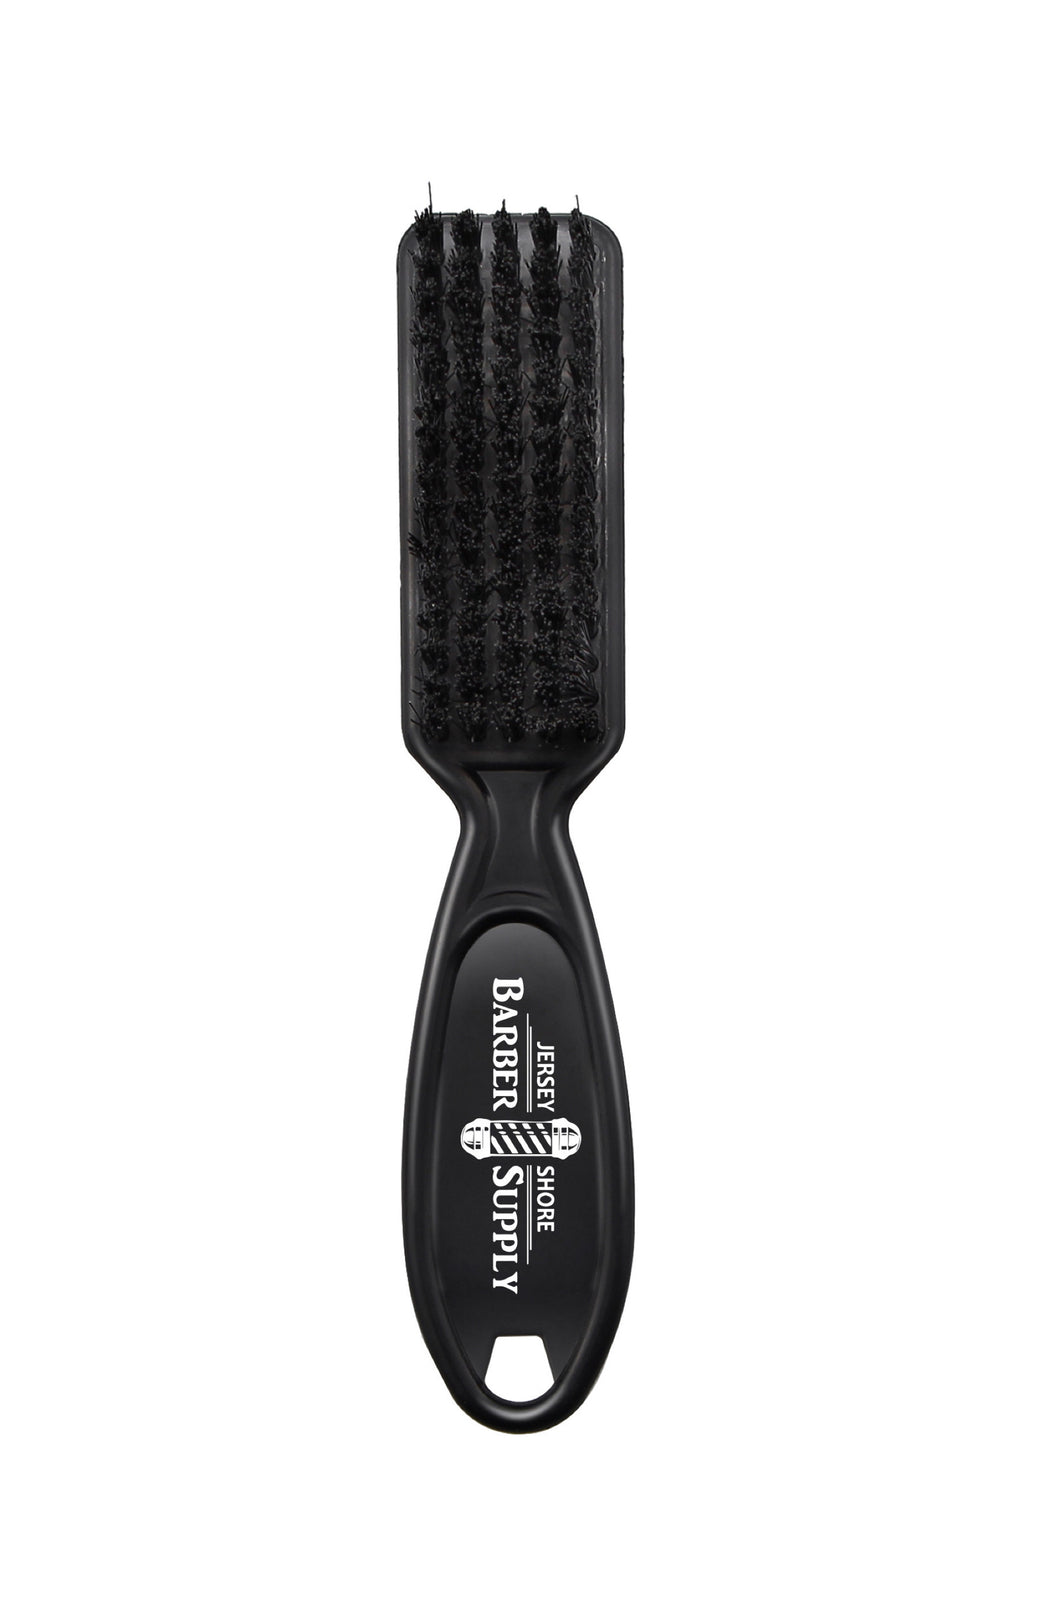 Jersey Shore Barber Supply Clipper Cleaning Brush